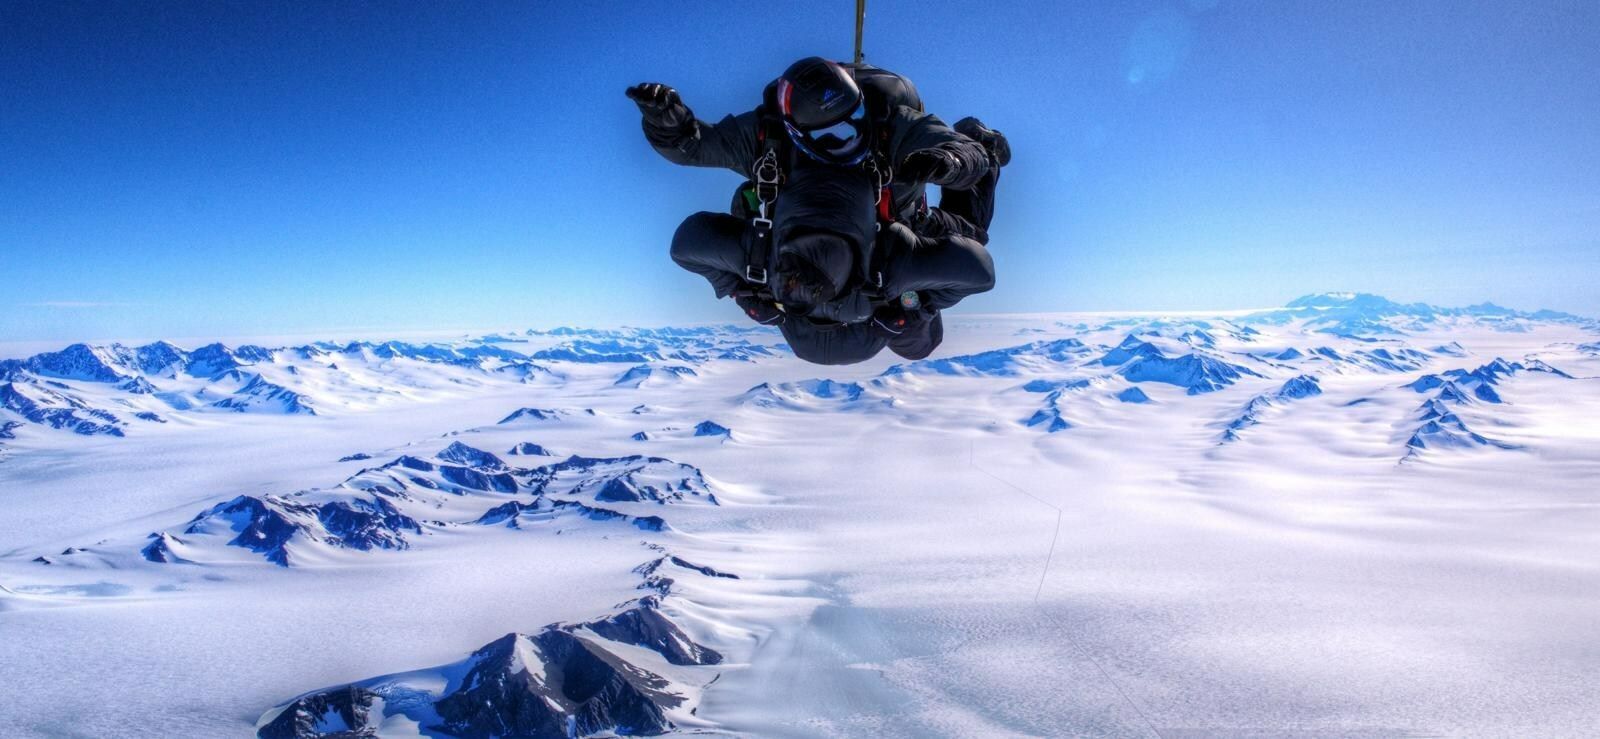 Fastest time to tandem skydive all seven continents: James C. Wigginton and Nick Kush